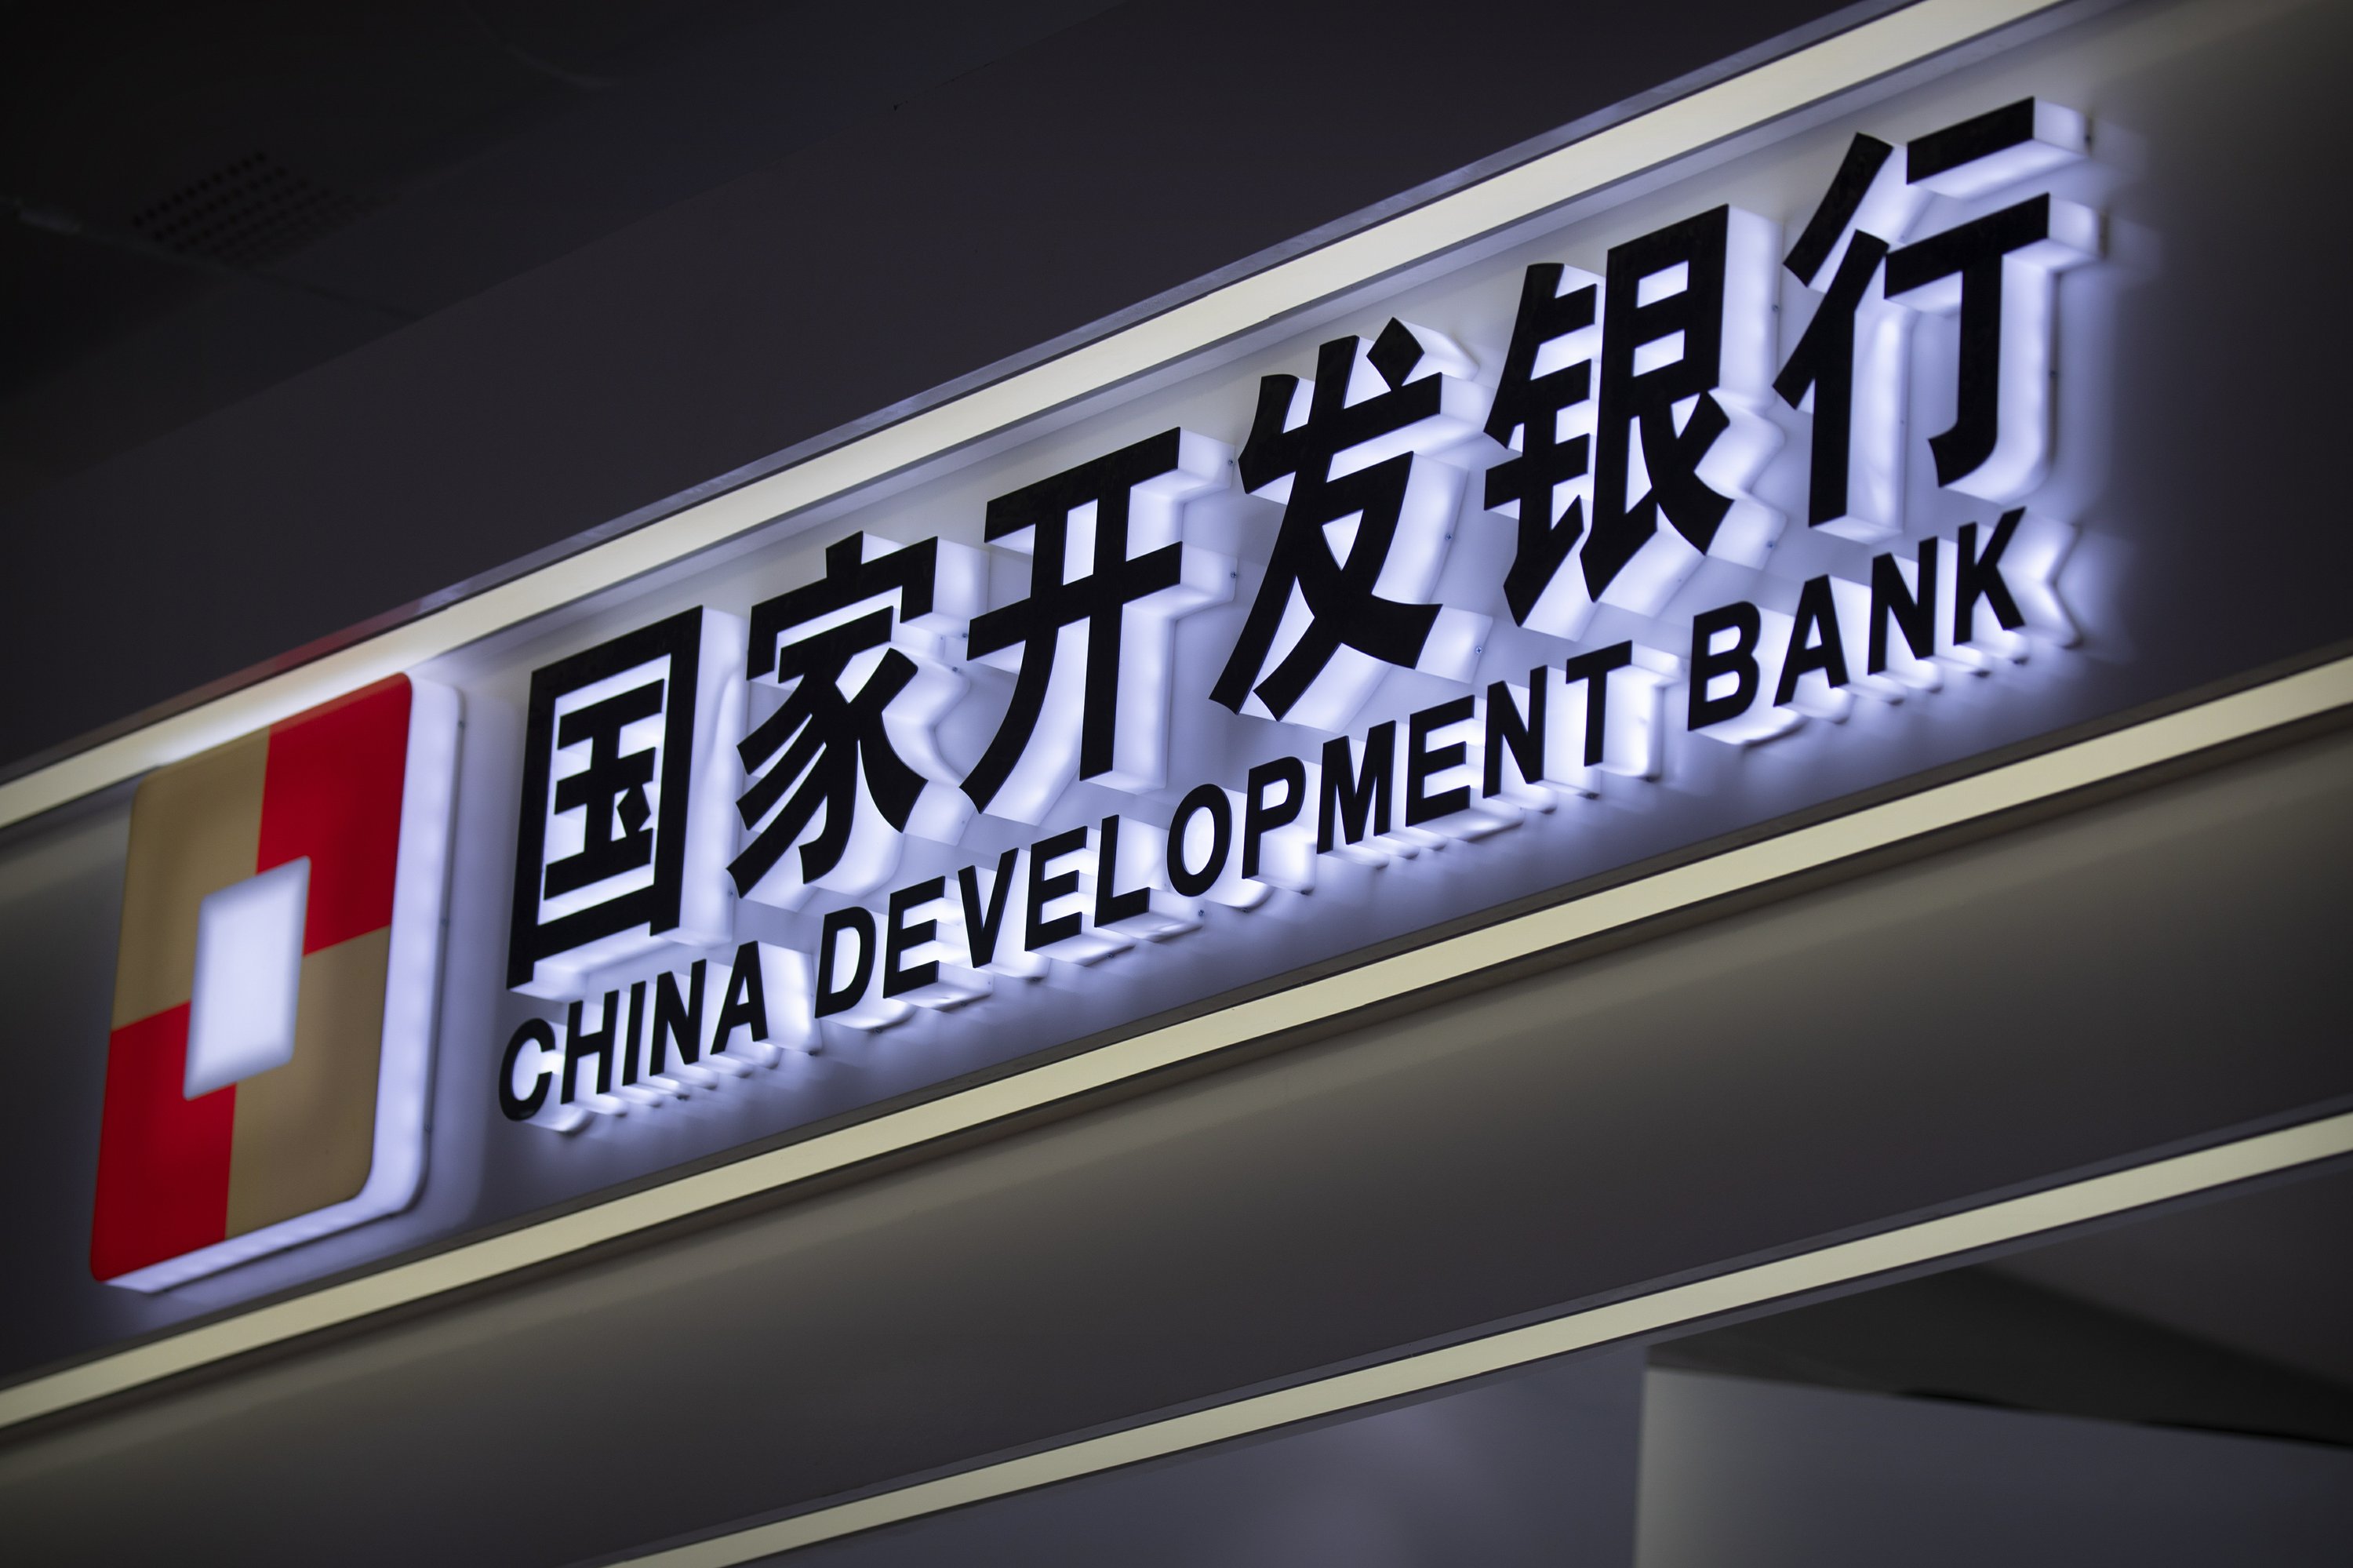 The head of the Chinese bank jailed behind foreign buildings